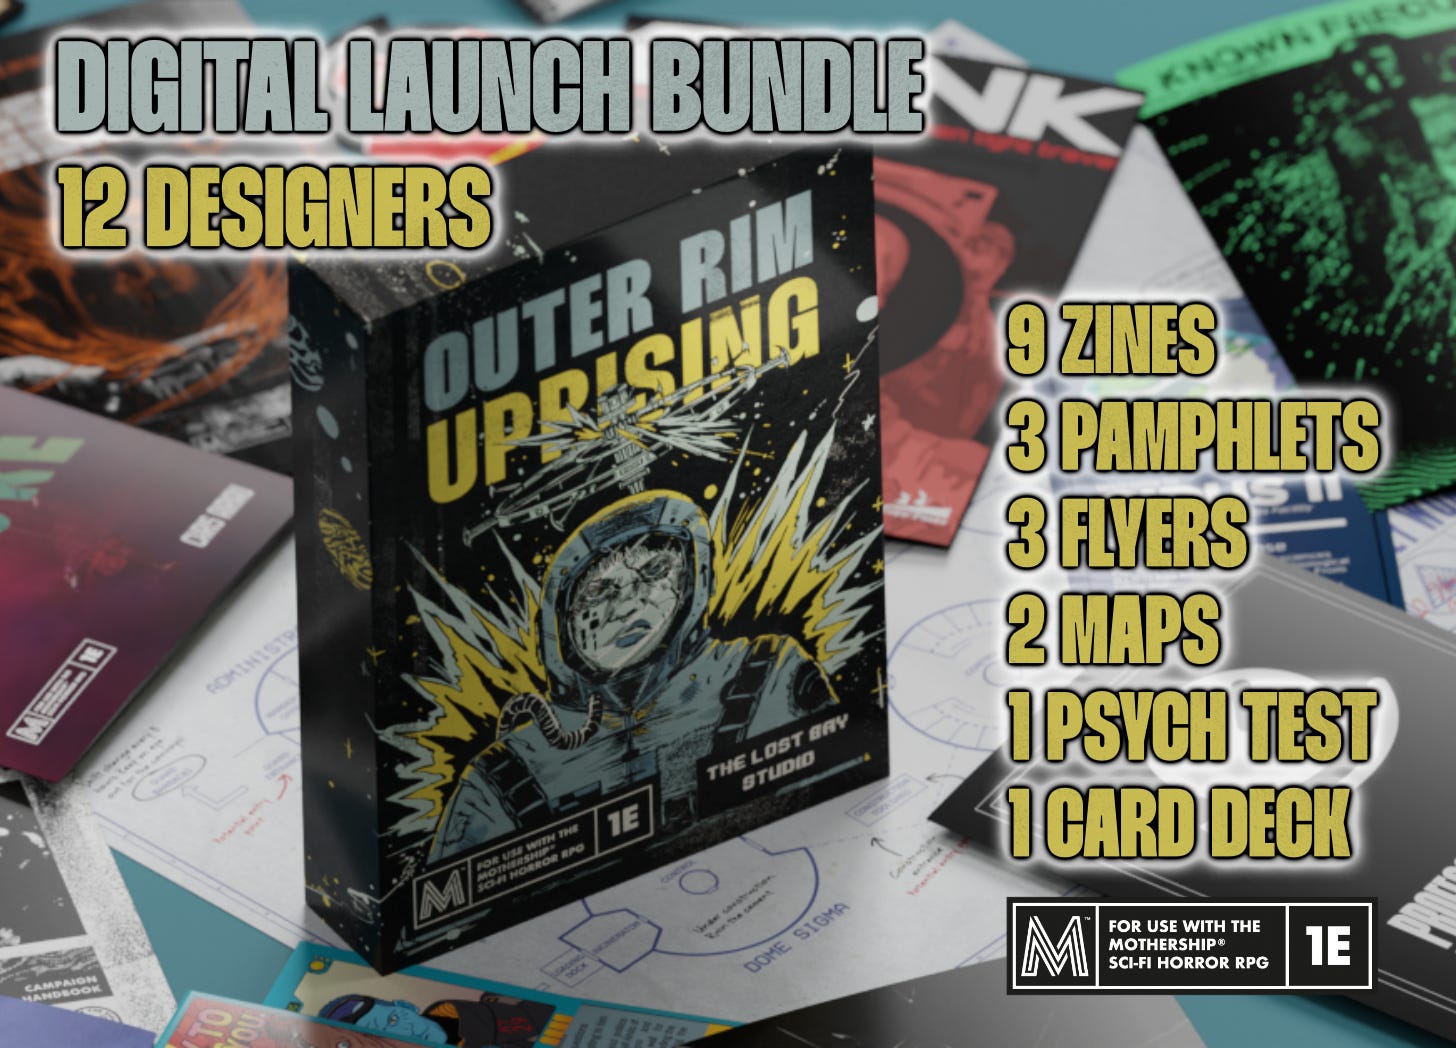 Digital Launch Bundle for Outer Rim: Uprising. 12 Designers. 9 Zines, 3 Pamphlets, 3 Flyers, 2 Maps, 1 Psych Test, 1 Card Deck. For Use with the Mothership Sci-Fi Horror RPG.